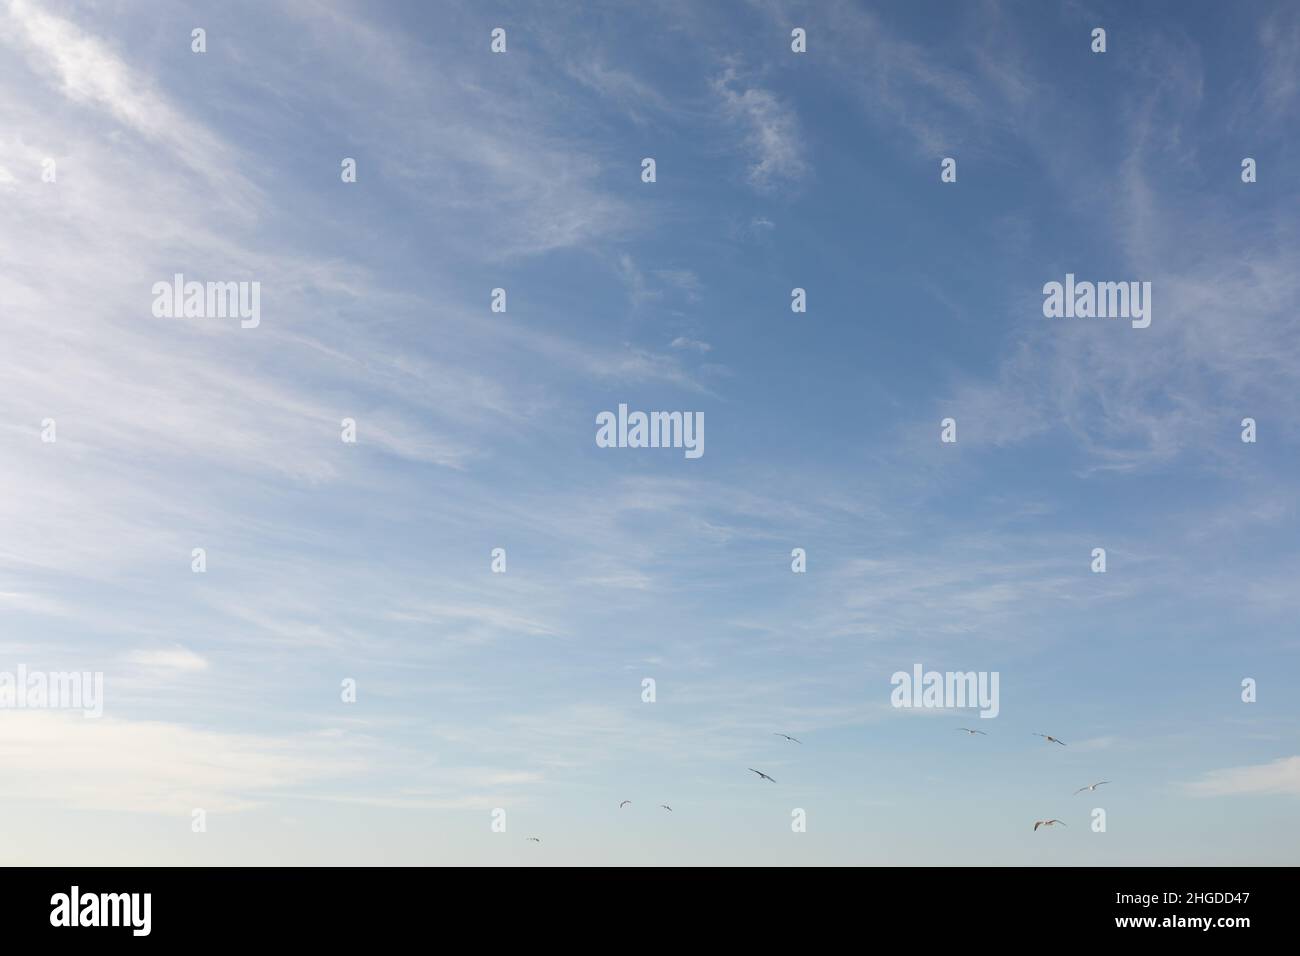 Low angle view of clouds with birds flying in blue sky on sunny day Stock Photo